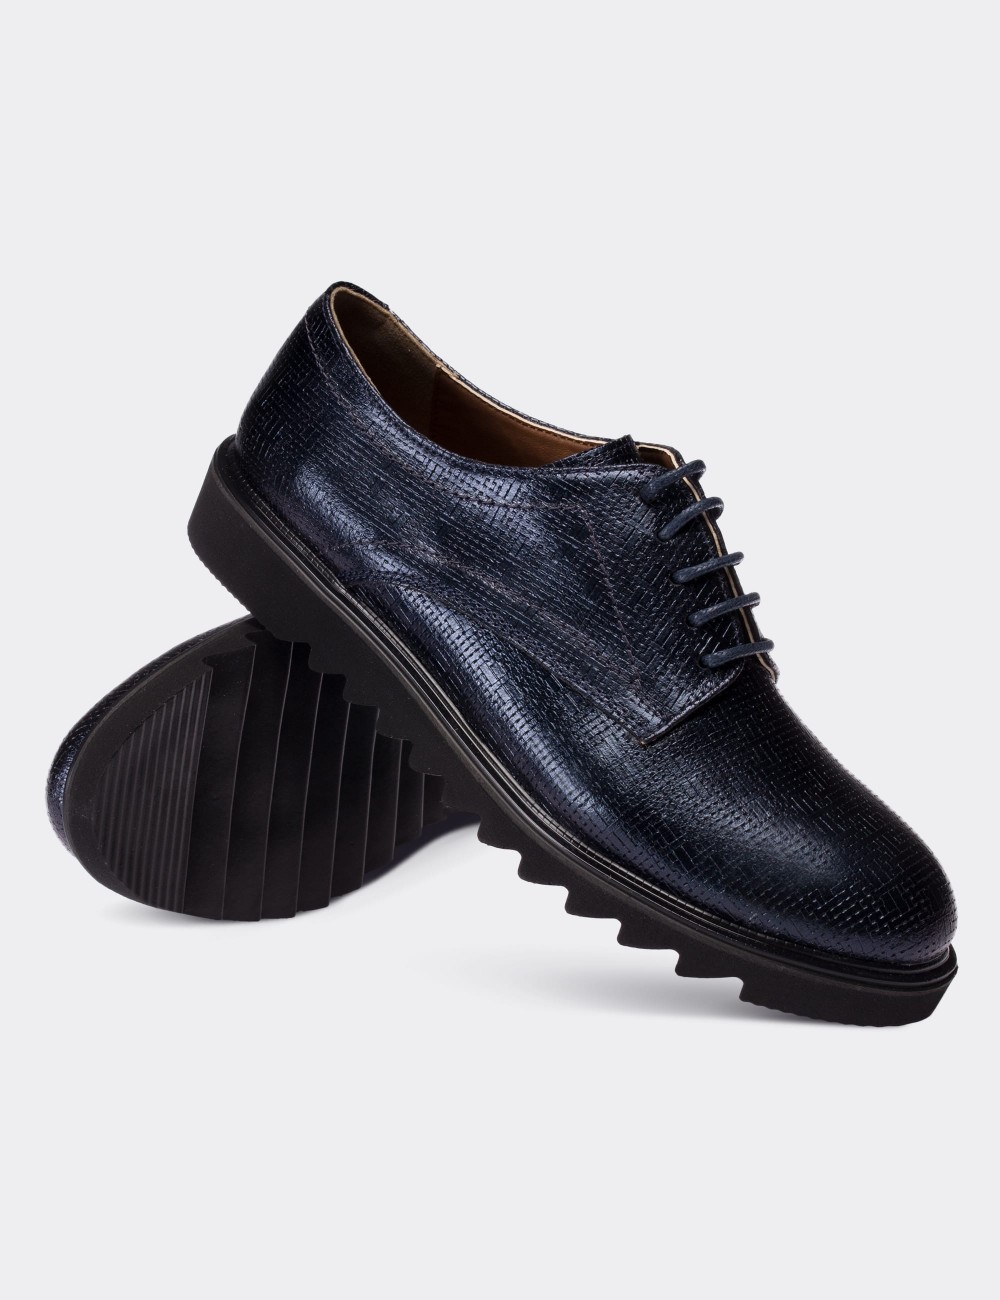 Navy  Leather Lace-up Oxford Shoes - 01430ZLCVE05